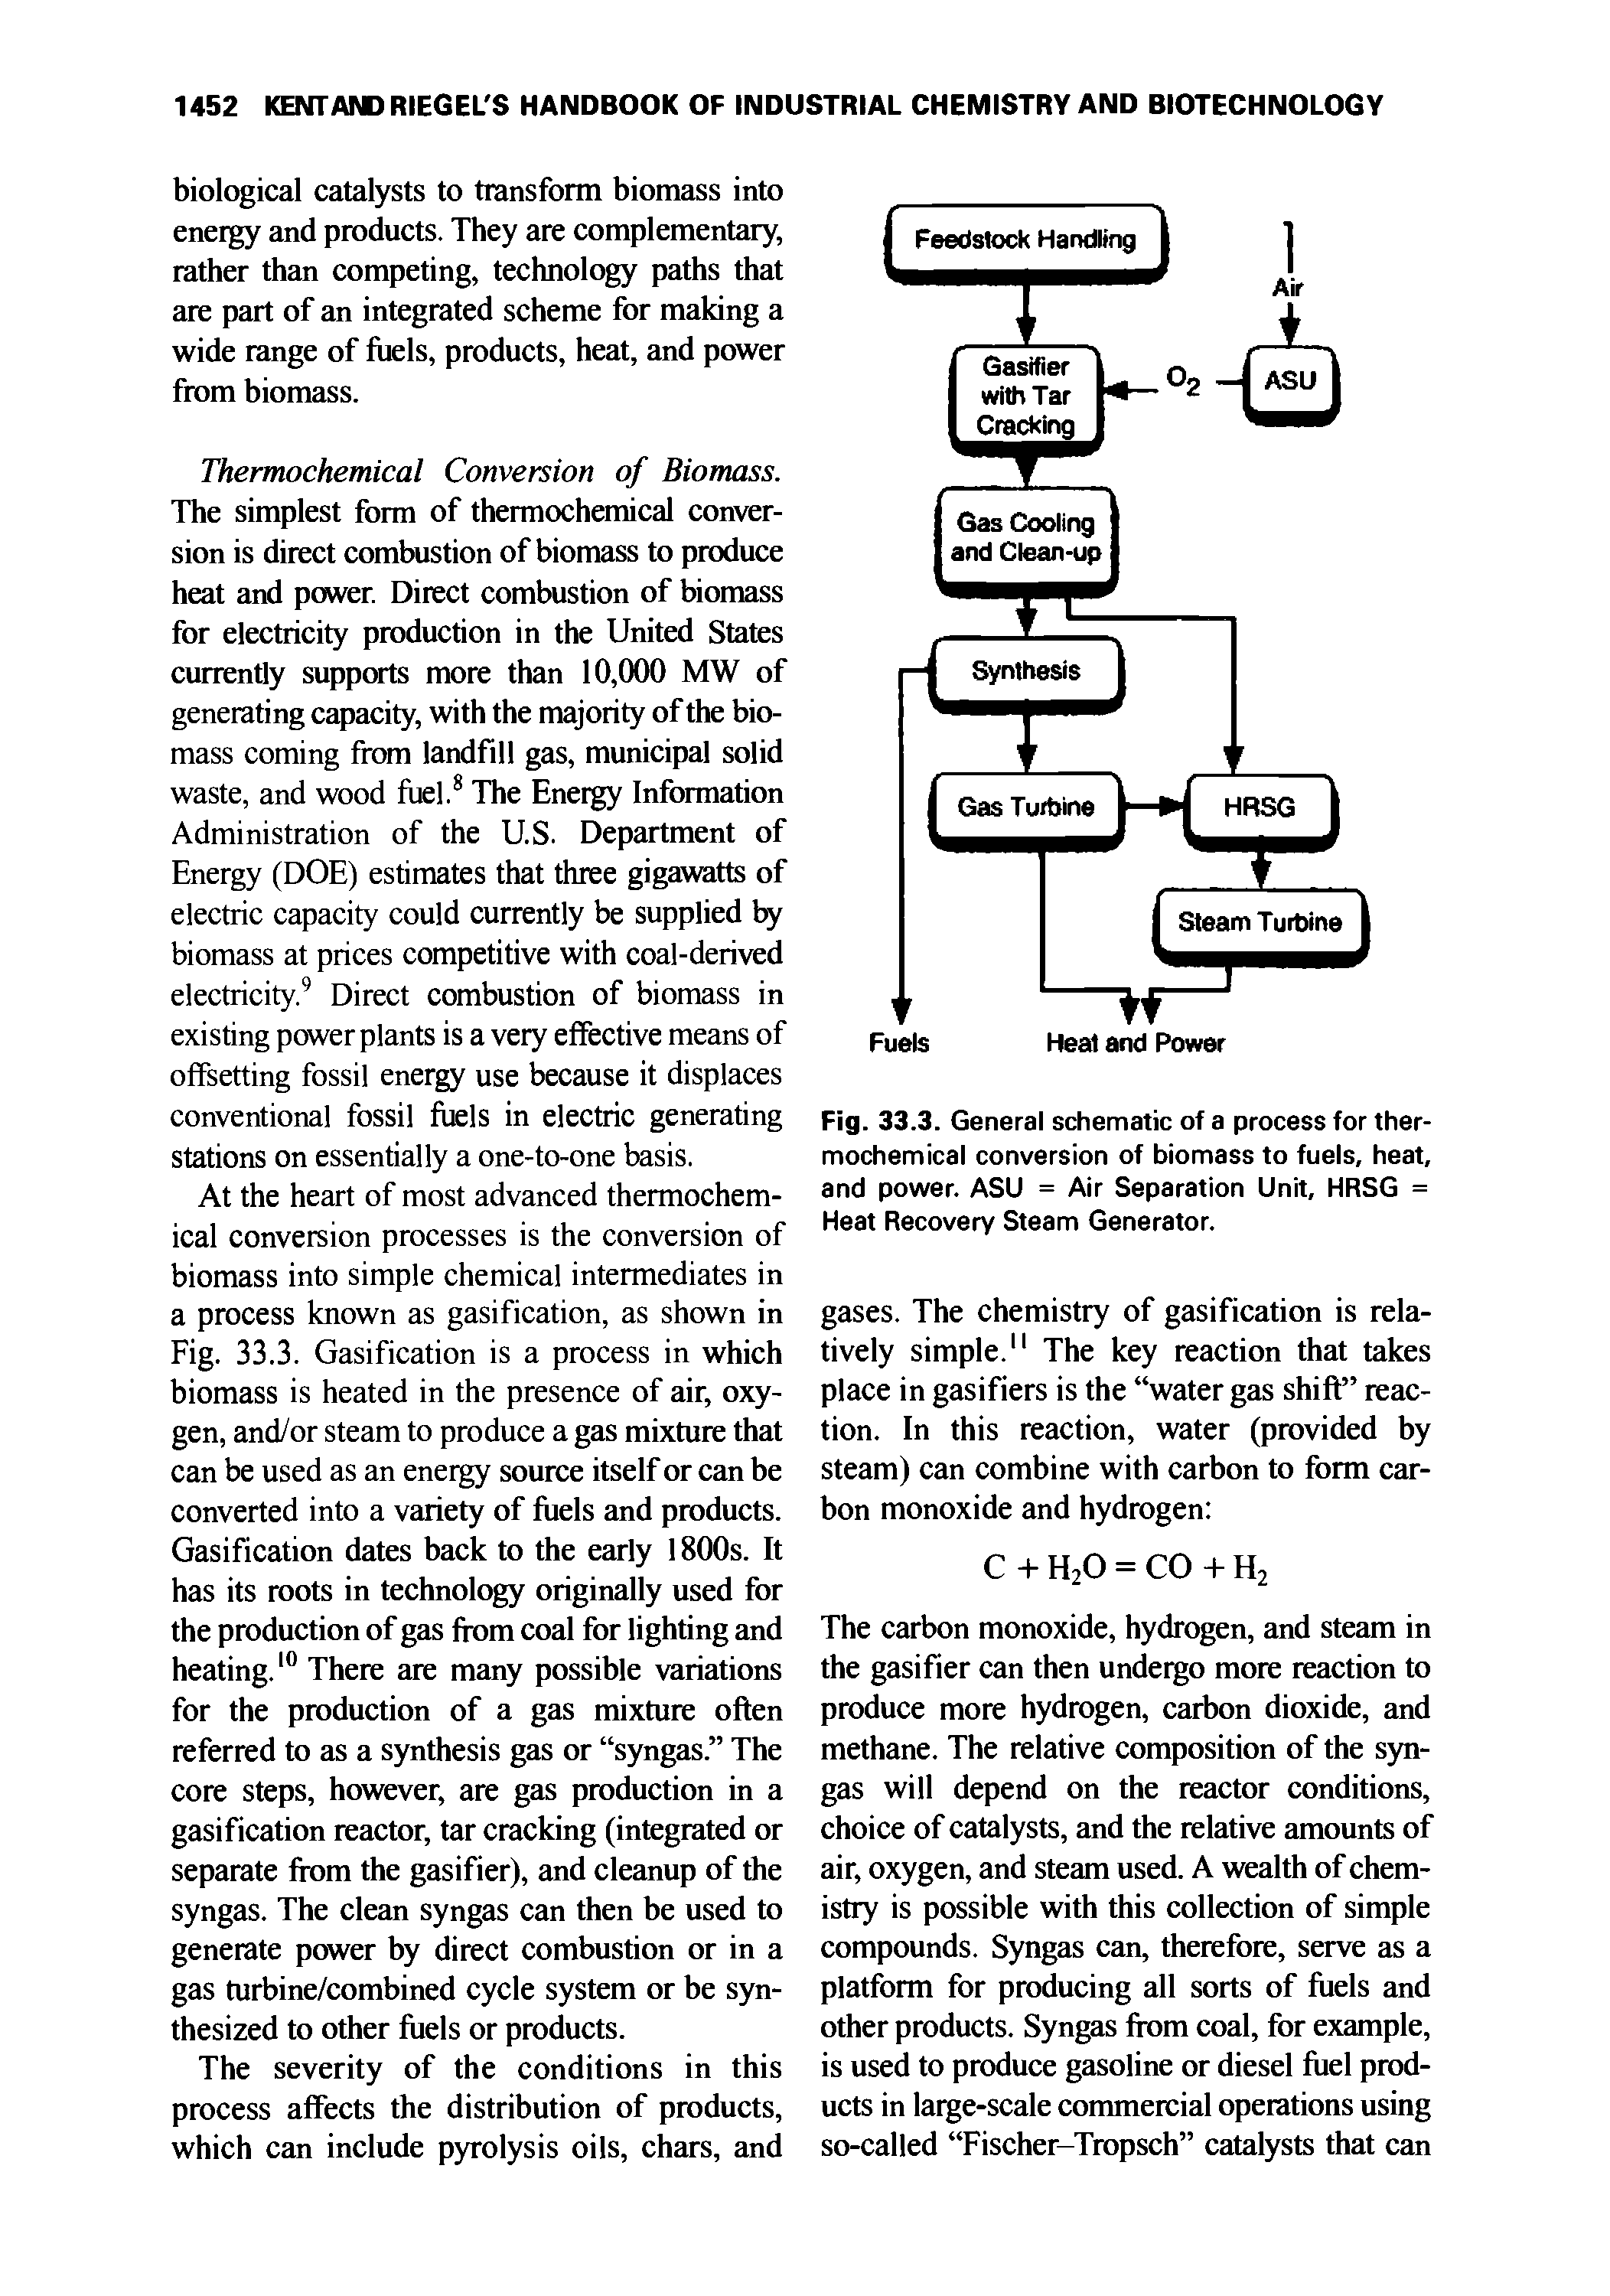 Fig. 33.3. General schematic of a process for thermochemical conversion of biomass to fuels, heat, and power. ASU = Air Separation Unit, HRSG = Heat Recovery Steam Generator.